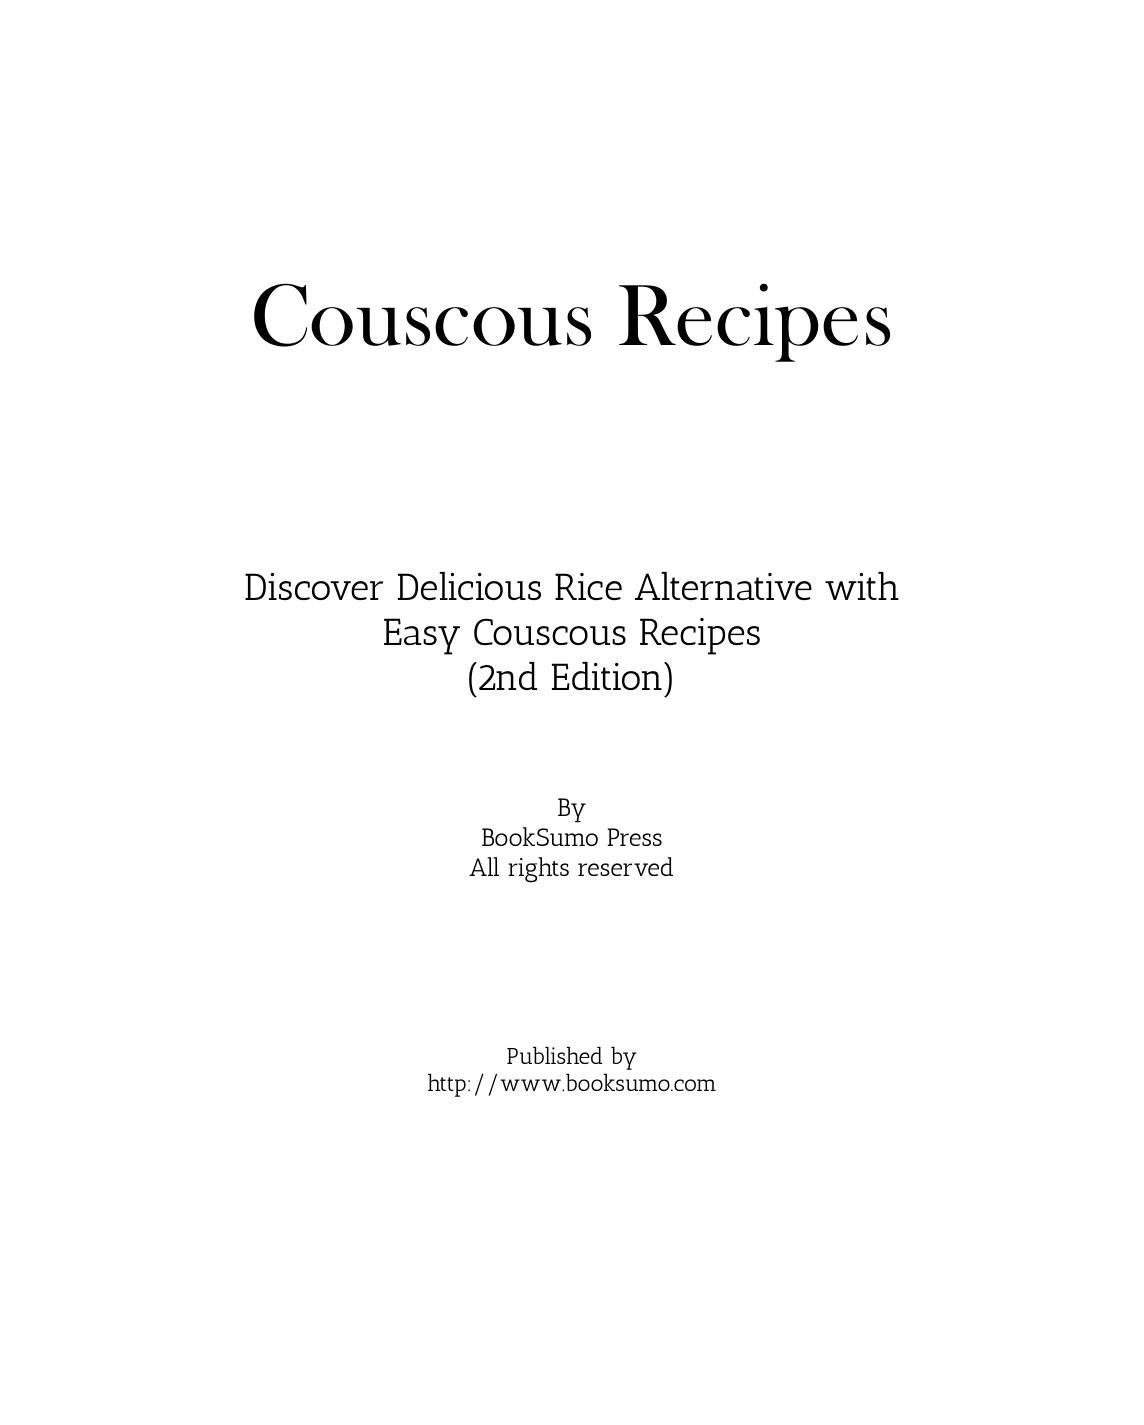 Couscous Recipes: Discover a Delicious Rice Alternative with Easy Couscous Recipes by BookSumo Press